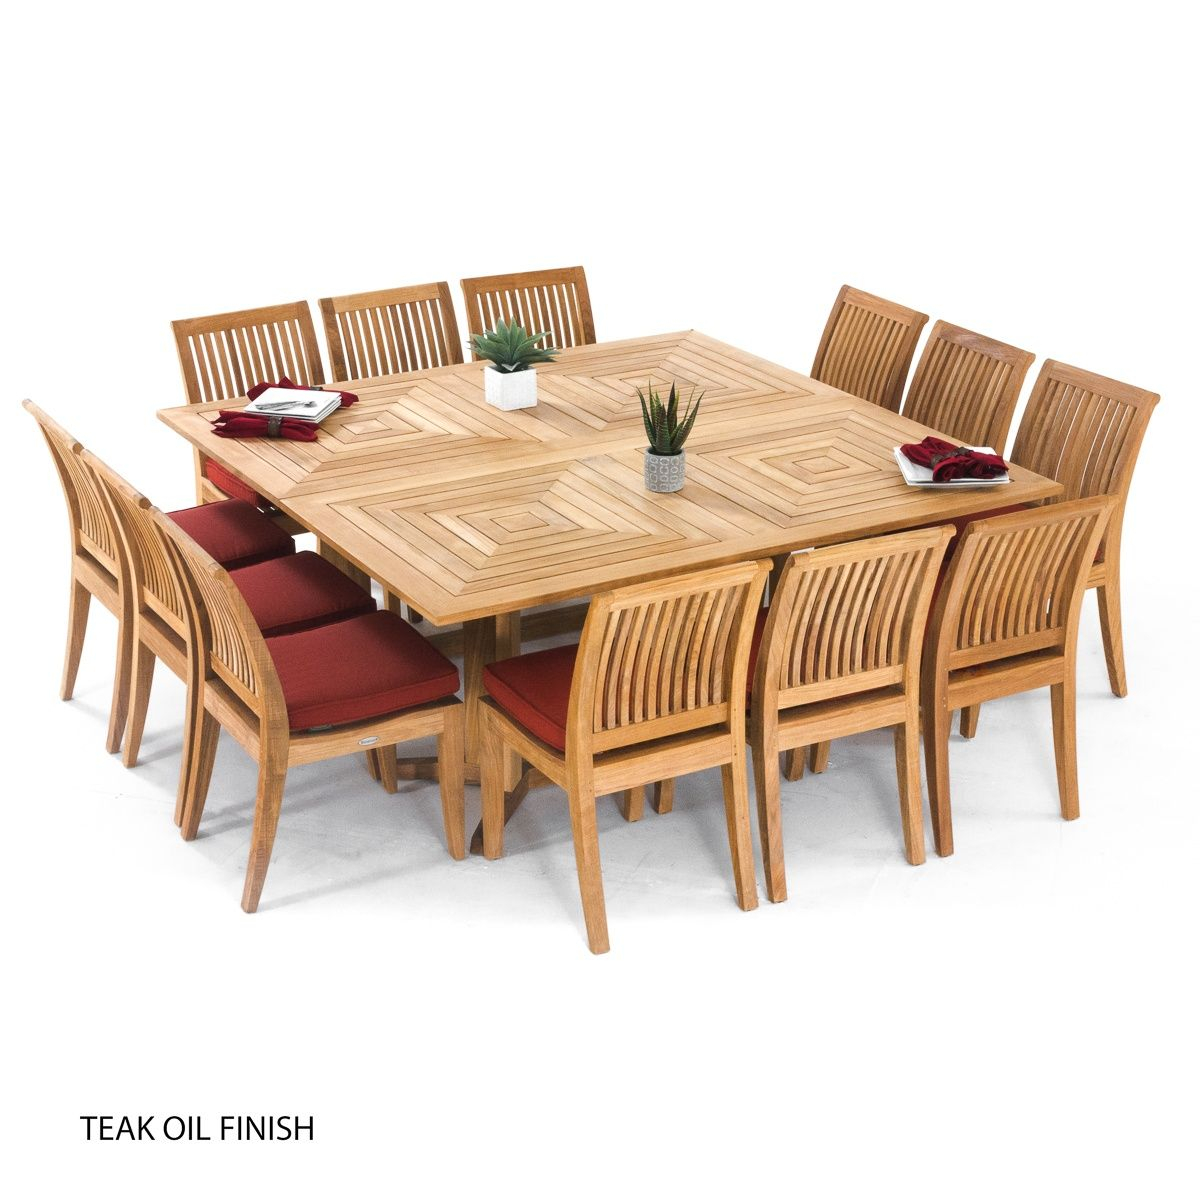 Large Teak Dining Set For 12 People In 2020 Teak Outdoor within dimensions 1200 X 1200